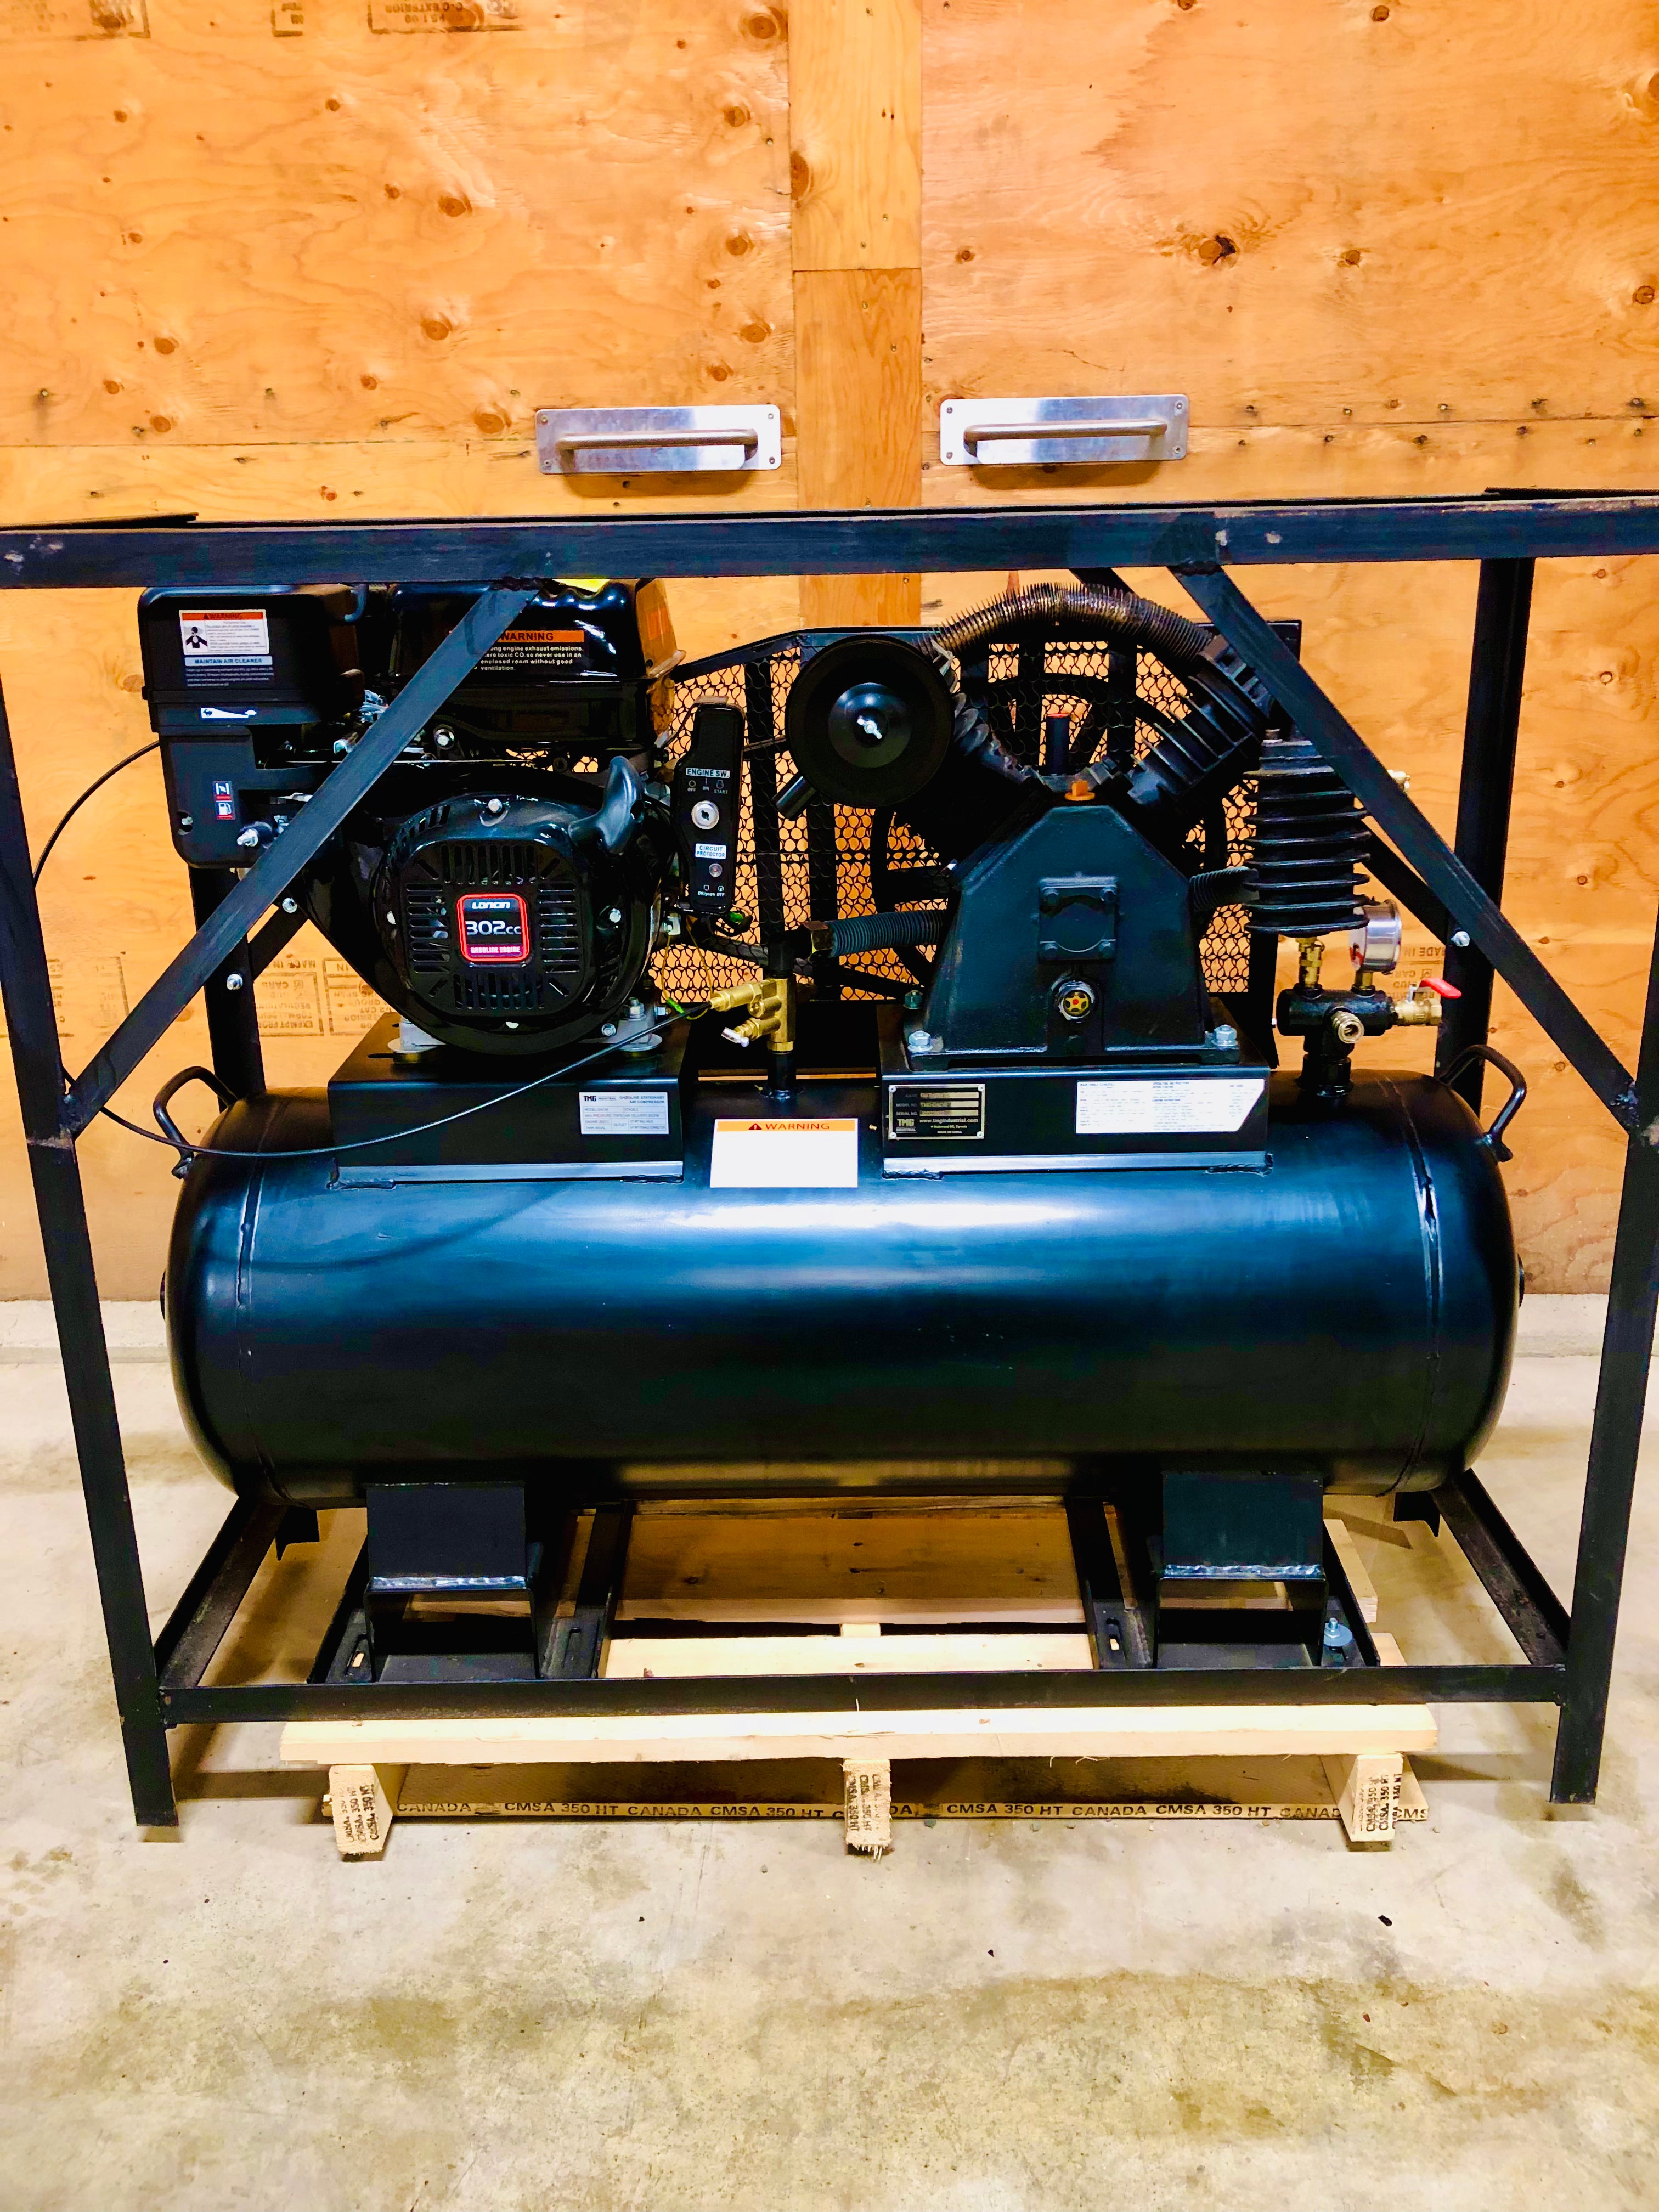 TMG Industrial 40 Gallon 2-Stage Truck Mounted Air Compressor, 9 HP OH